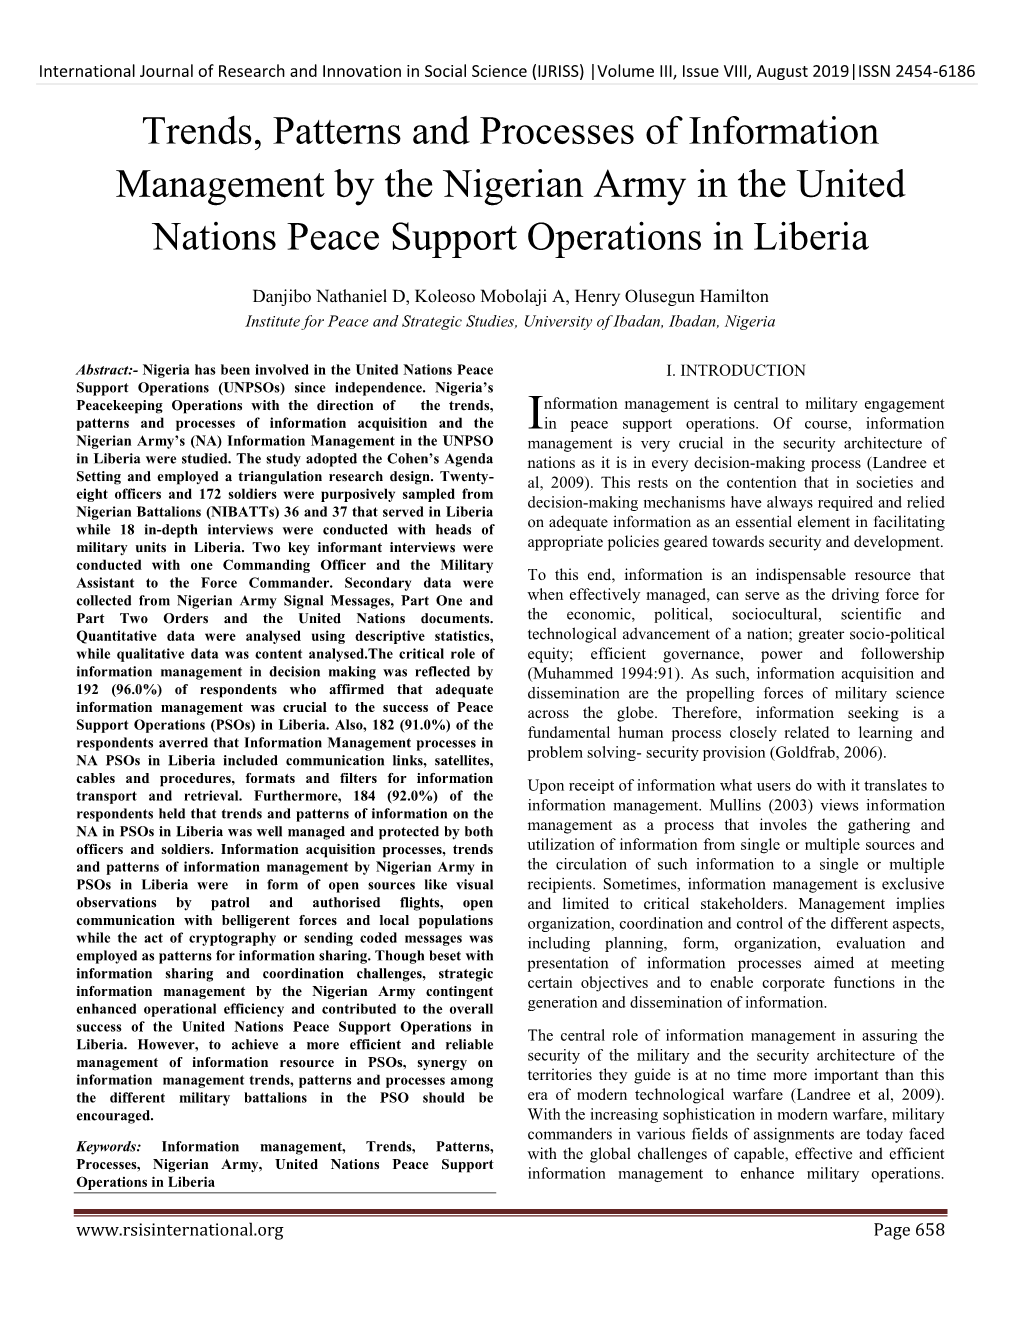 Trends, Patterns and Processes of Information Management by the Nigerian Army in the United Nations Peace Support Operations in Liberia